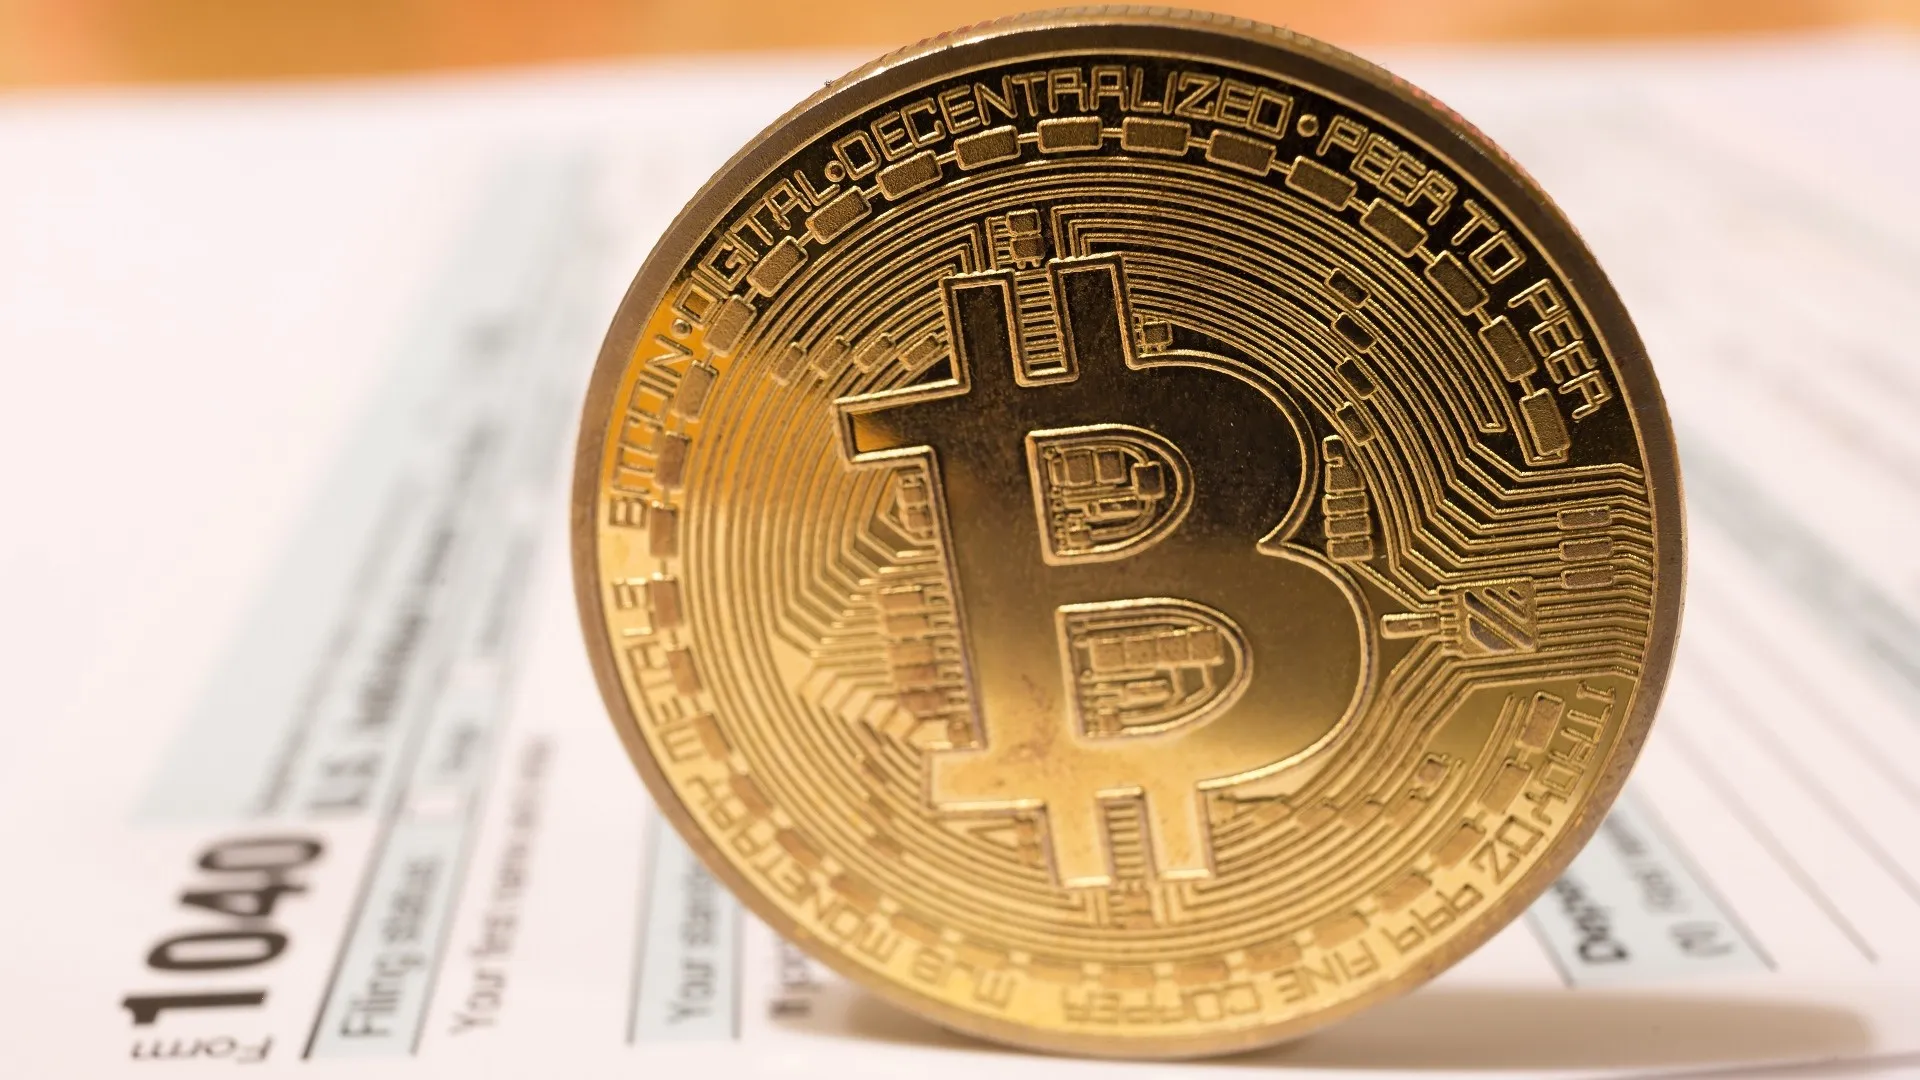 USA Bitcoin cryptocurrency tax day april 15 2019 stock photo